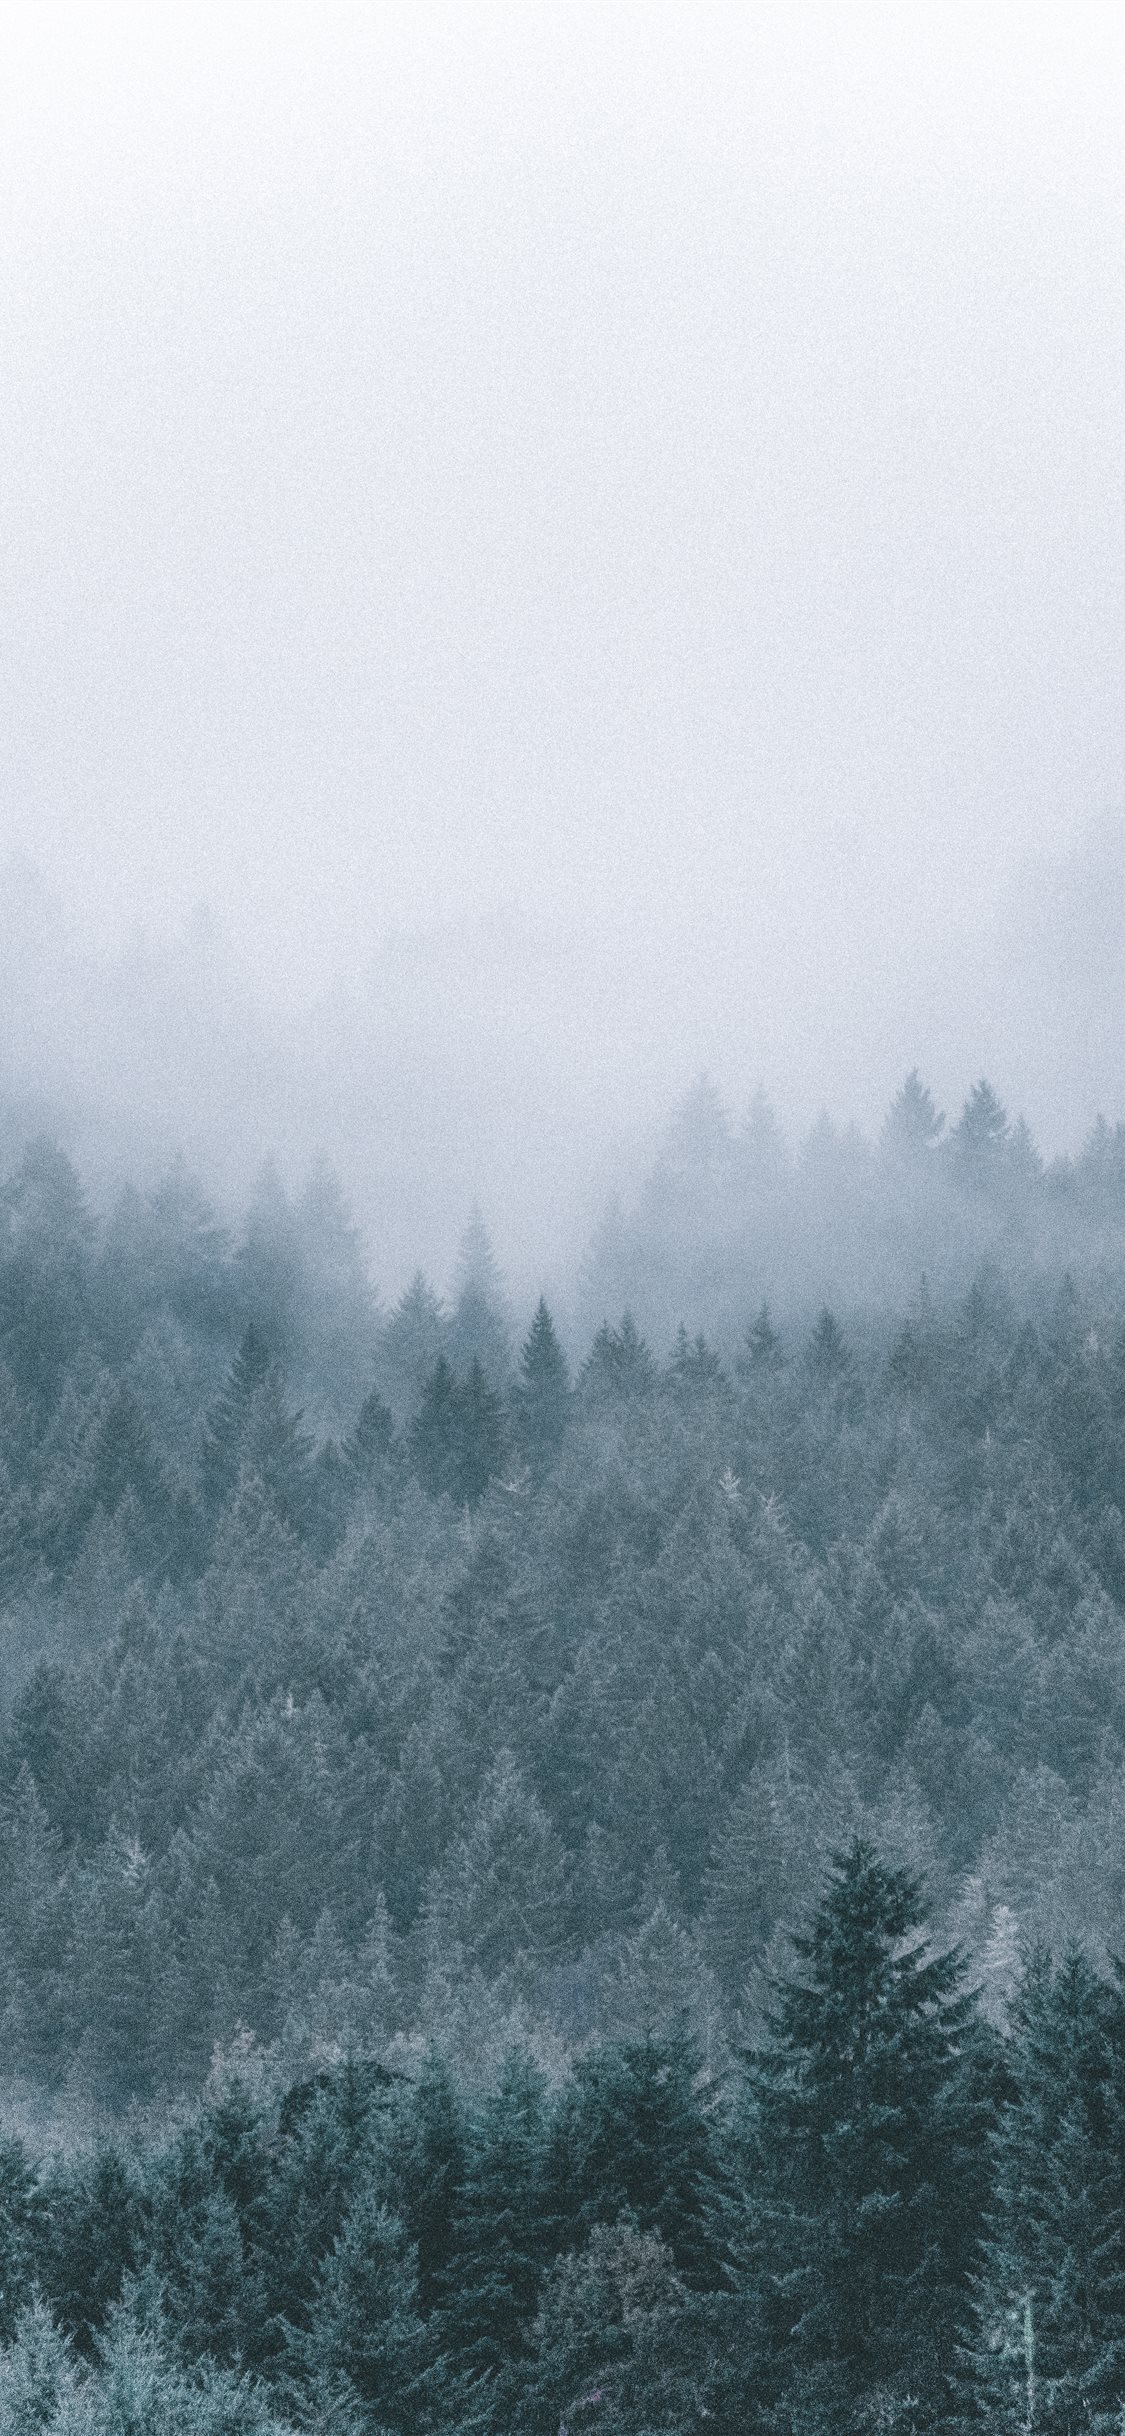 Foggy Scenery Wallpapers